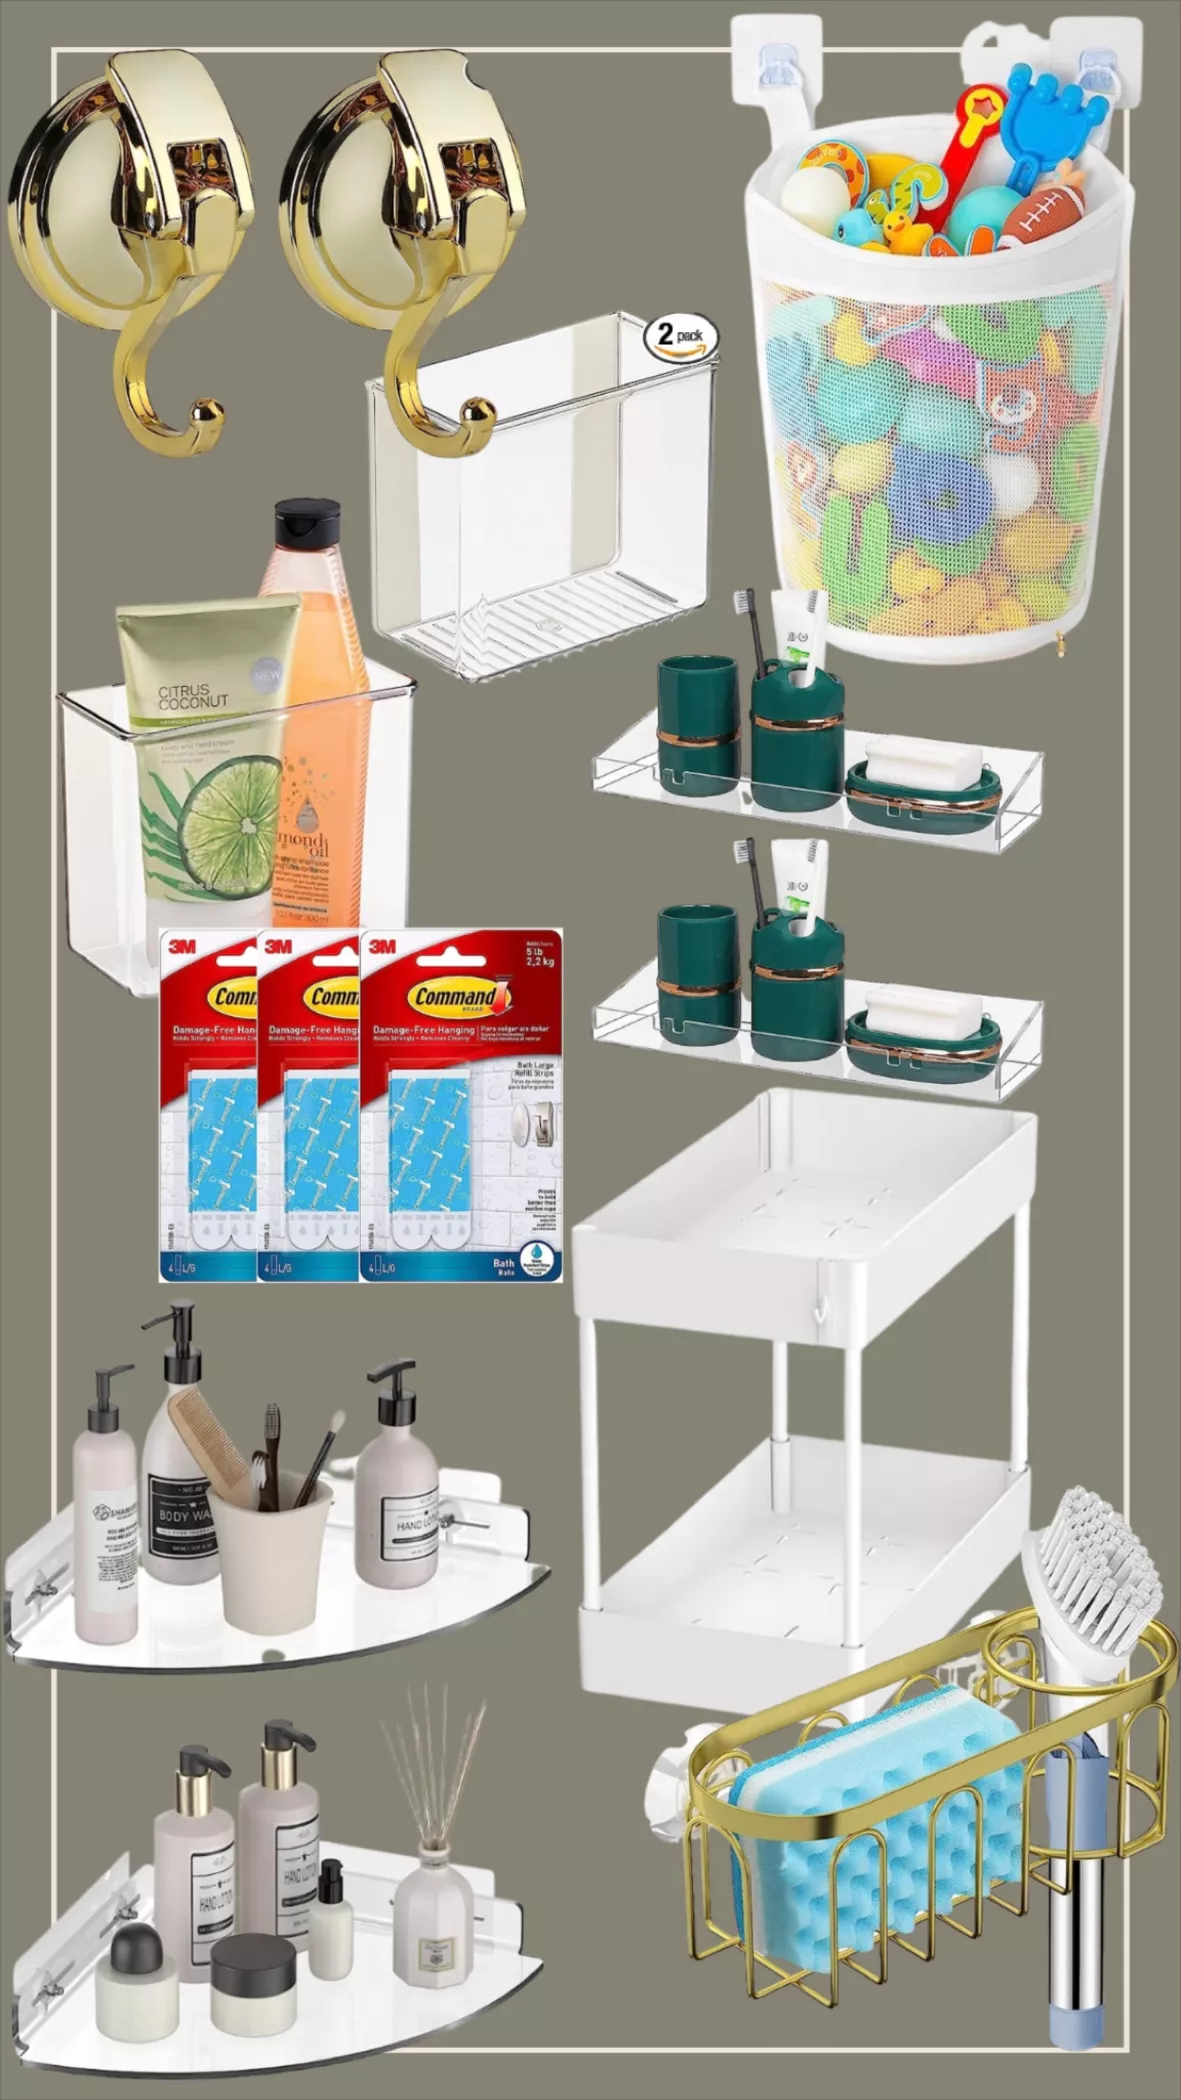 Geekdigg Adhesive Sticker For No Drilling Shower Caddy - Clear